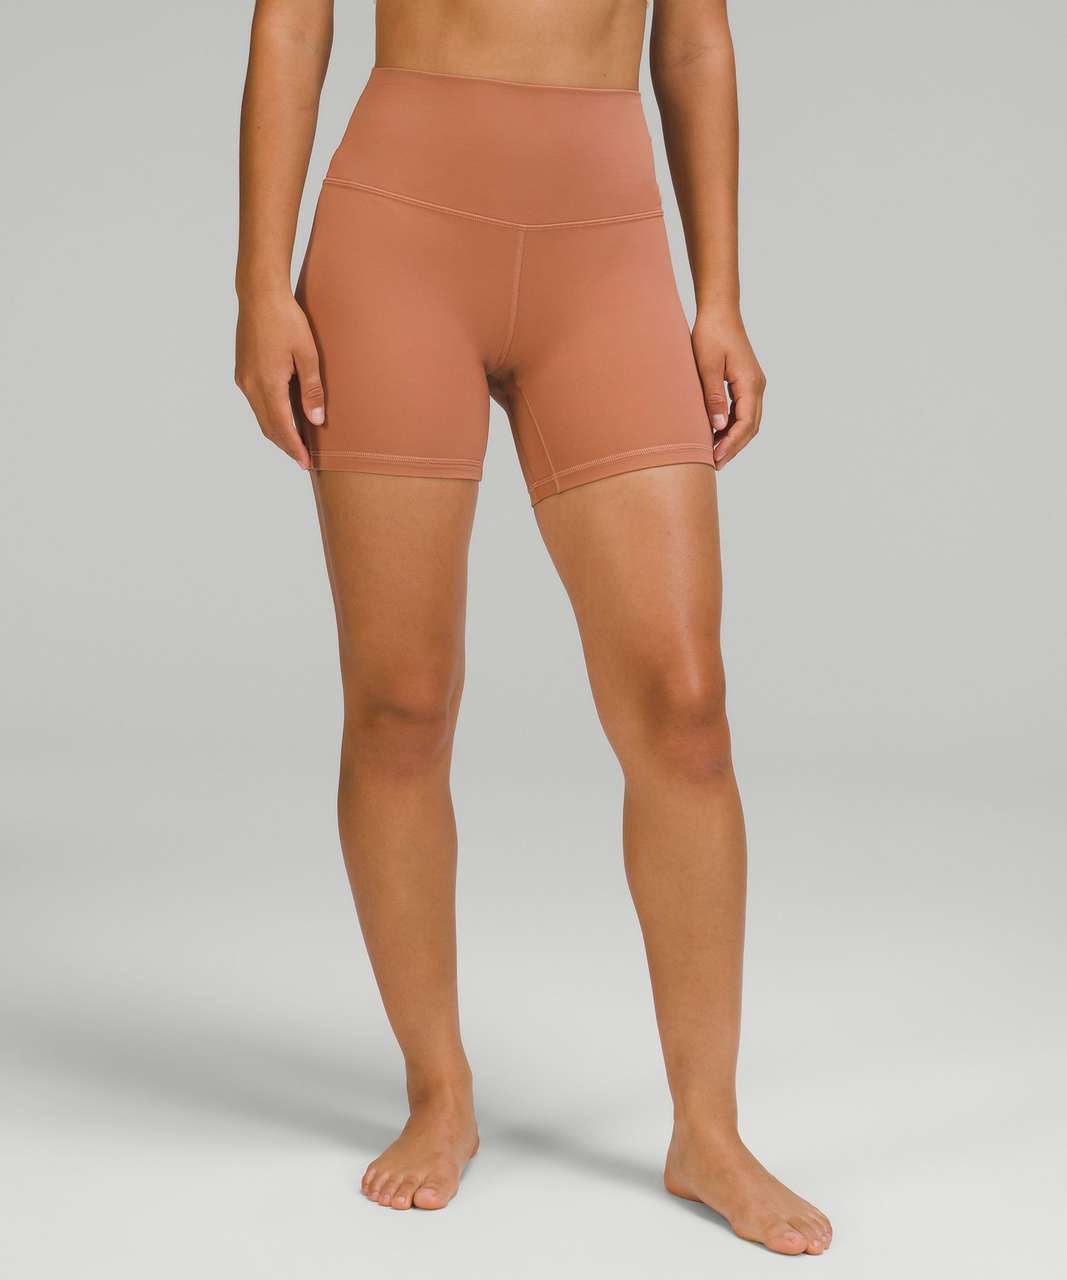 Lululemon NWT Align High-Rise Pant 28 - Dusty Clay Size 6 - $76 (22% Off  Retail) New With Tags - From A